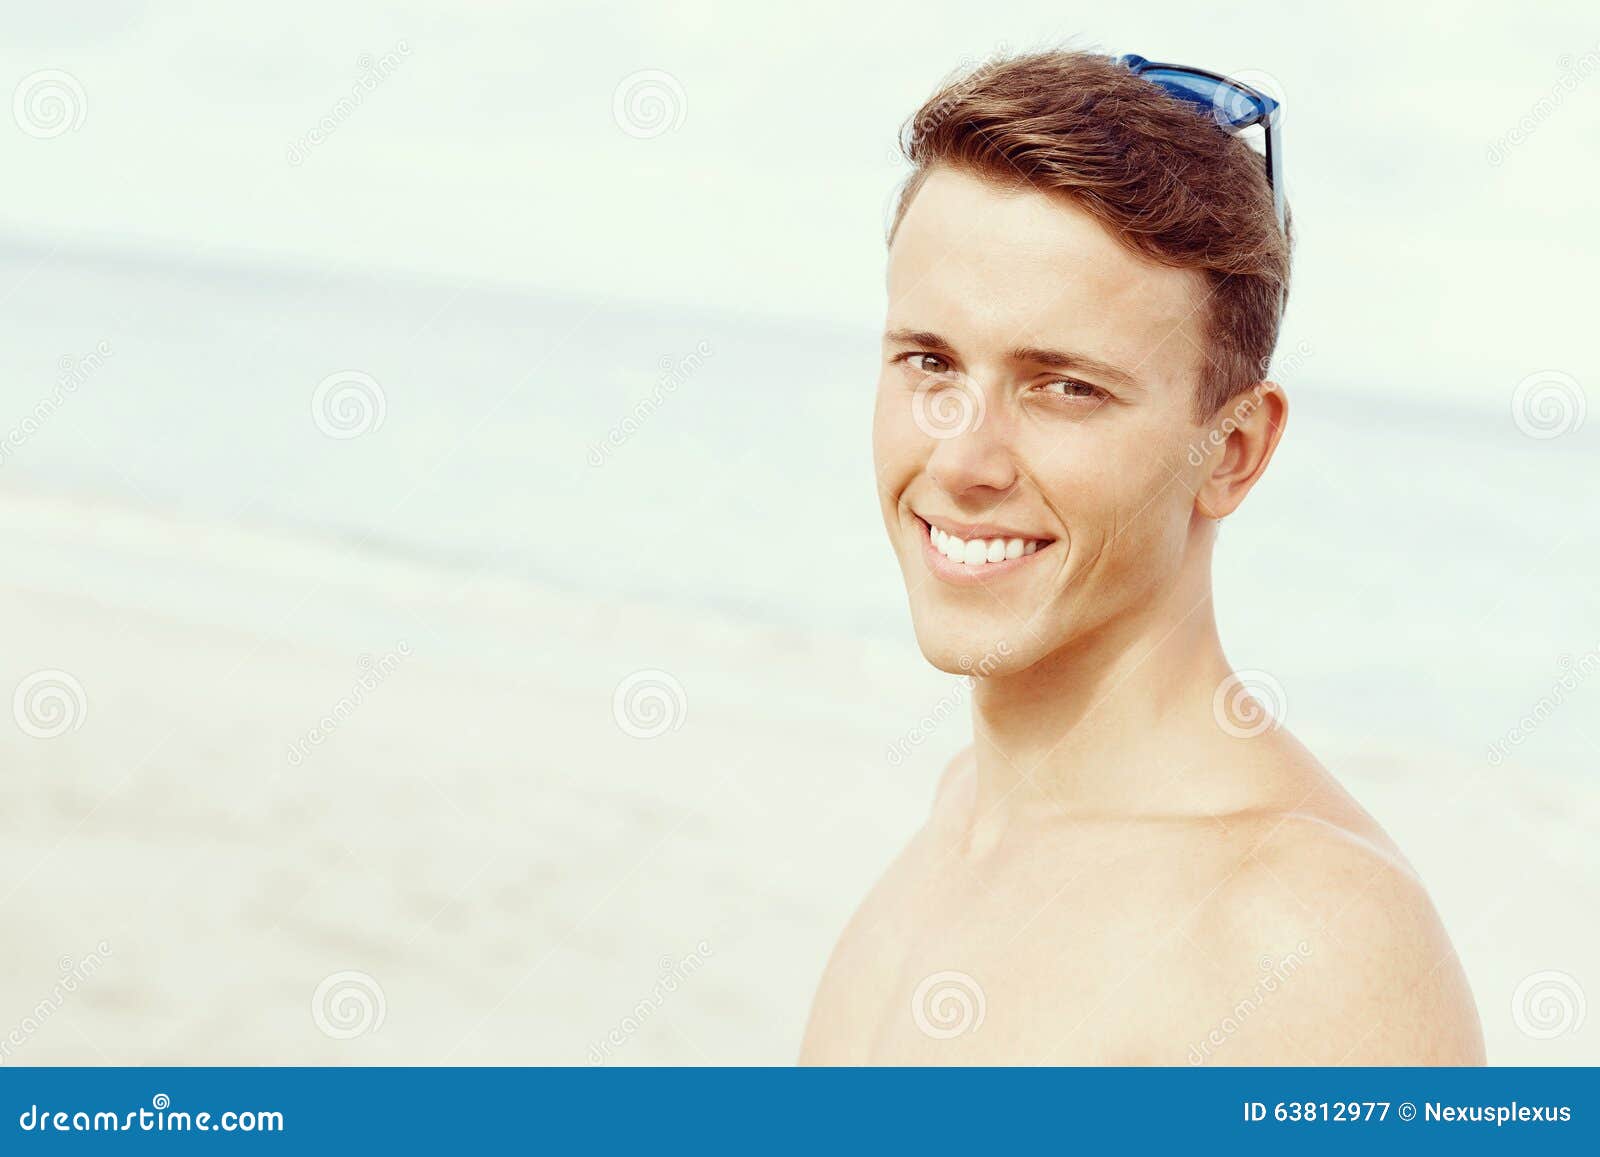 Handsome Man Posing at Beach Stock Image - Image of hipster, healthy ...